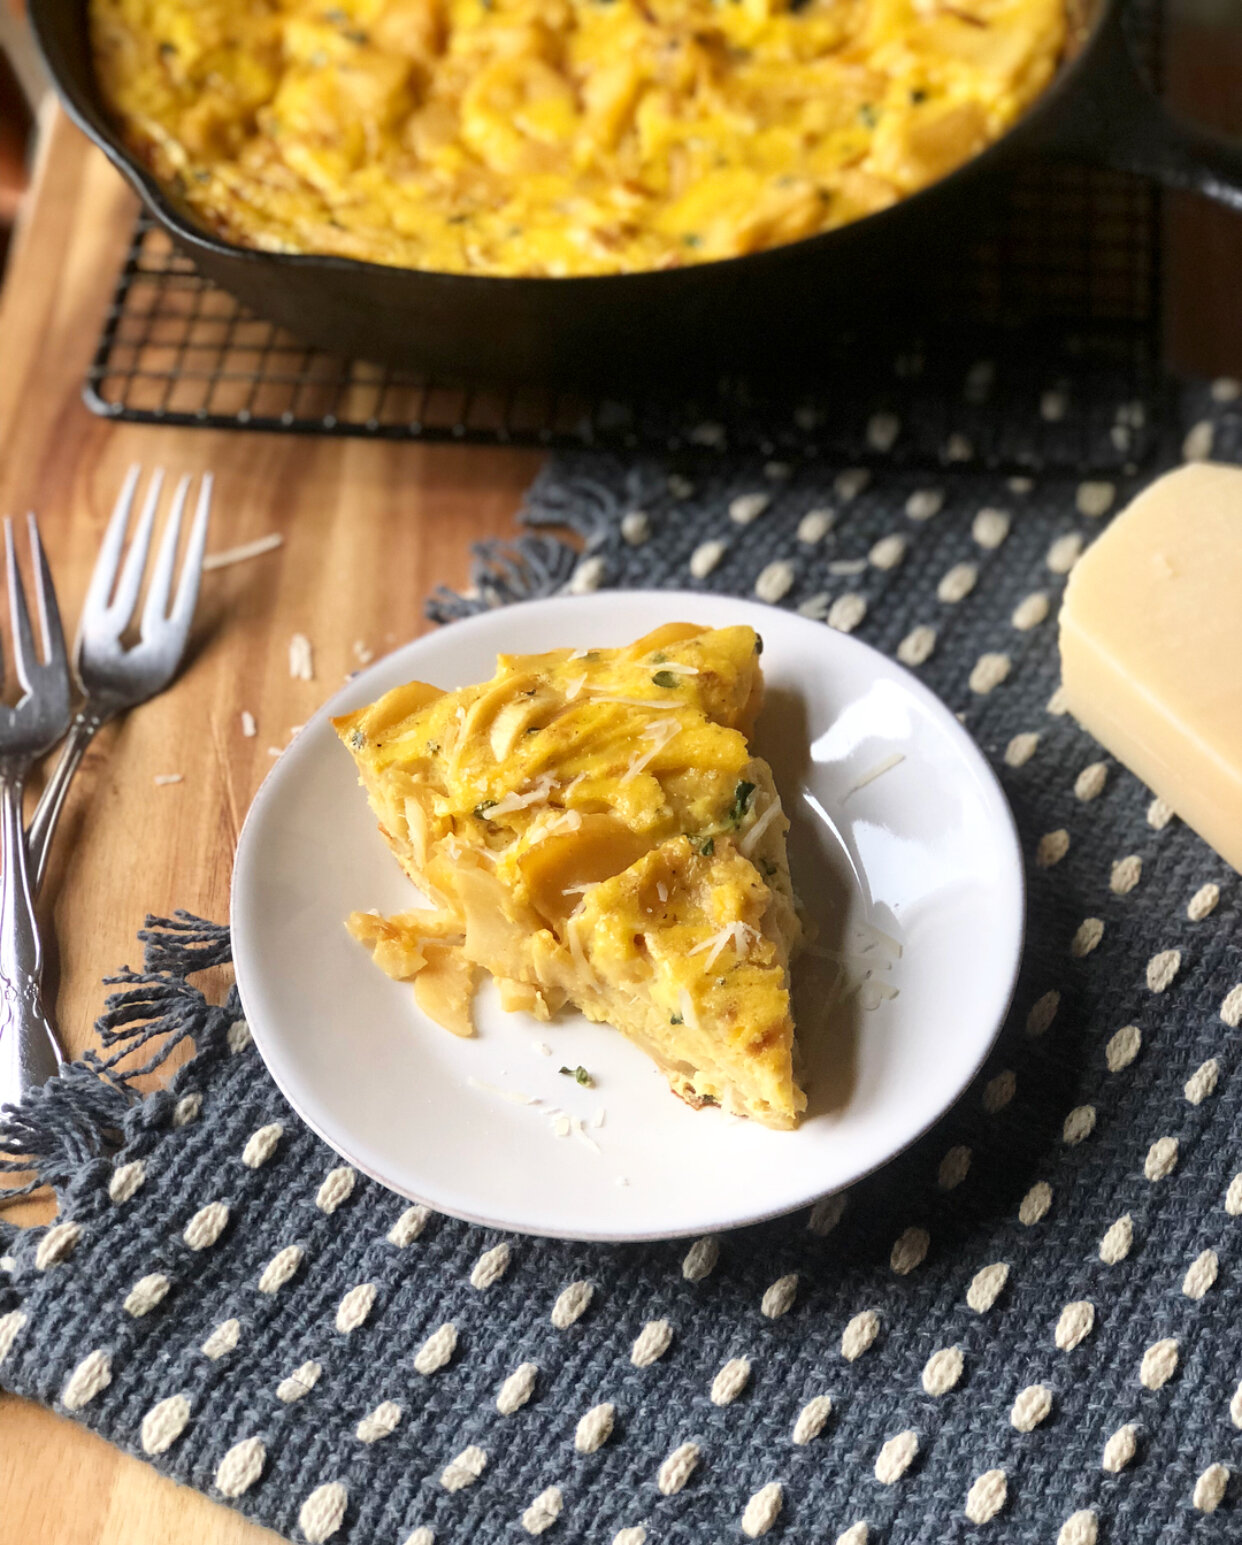 Caramelized Onion and Parsnip Frittata